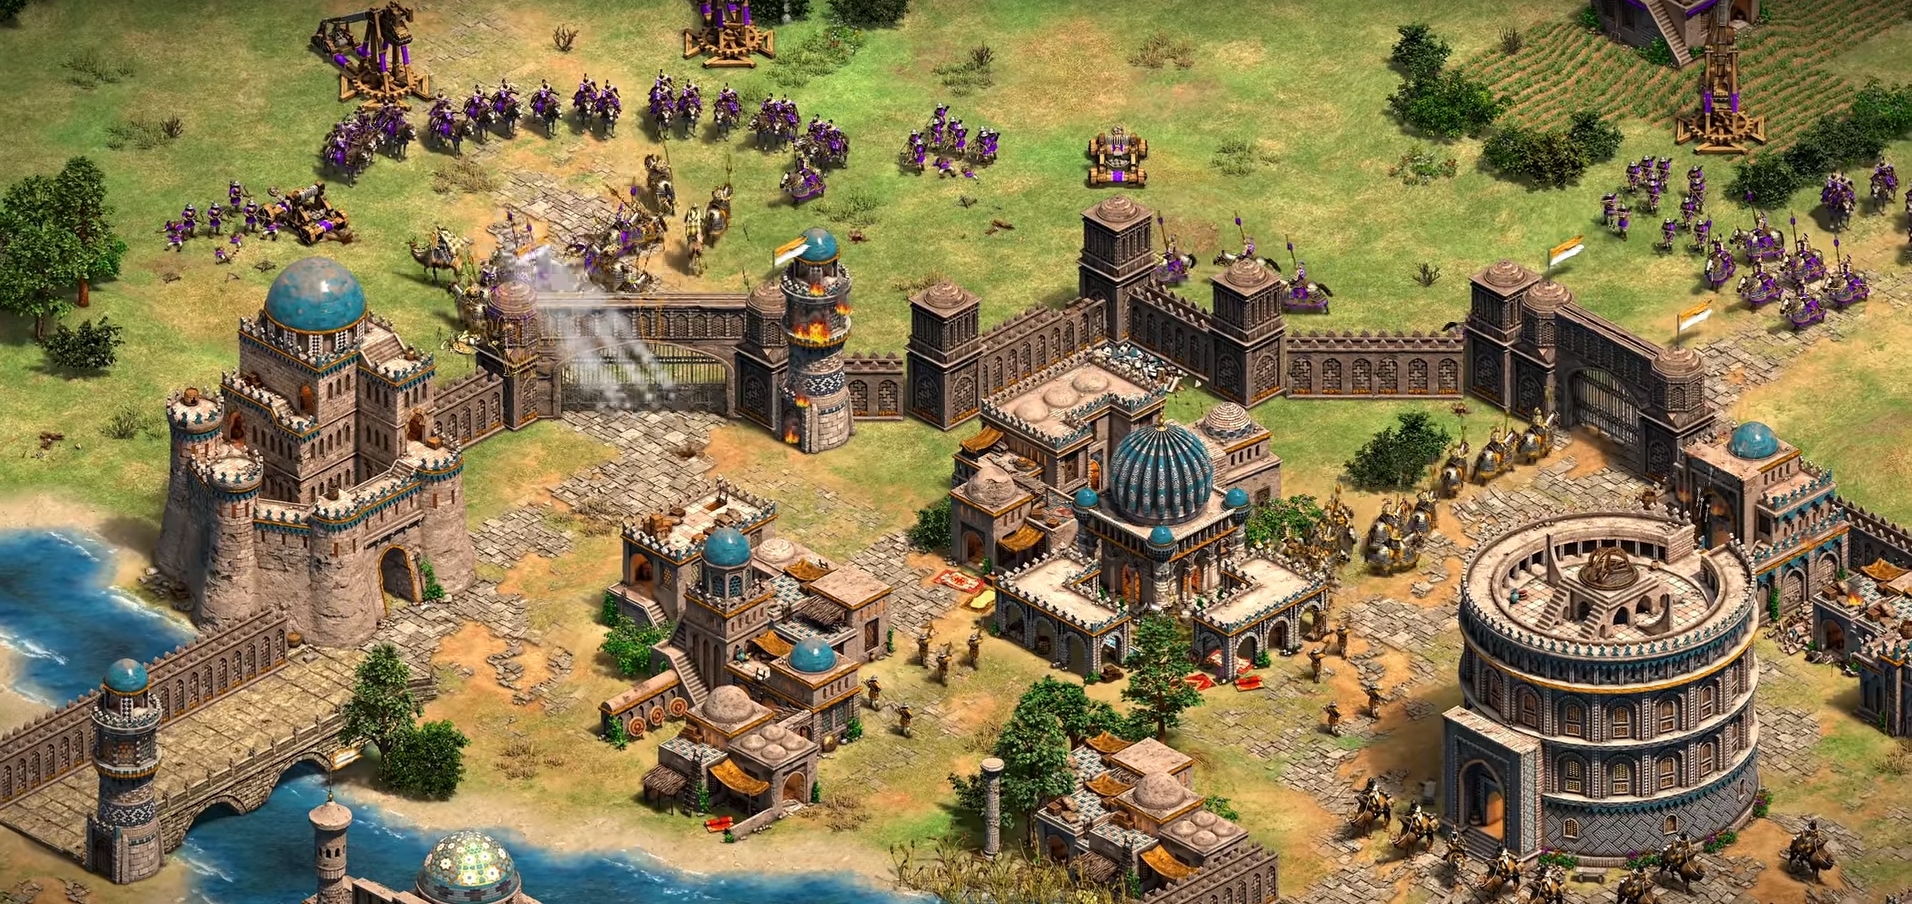 World’s Edge Announces Upcoming Maintenance As They Migrate Servers For Age Of Empires 2: Definitive Edition